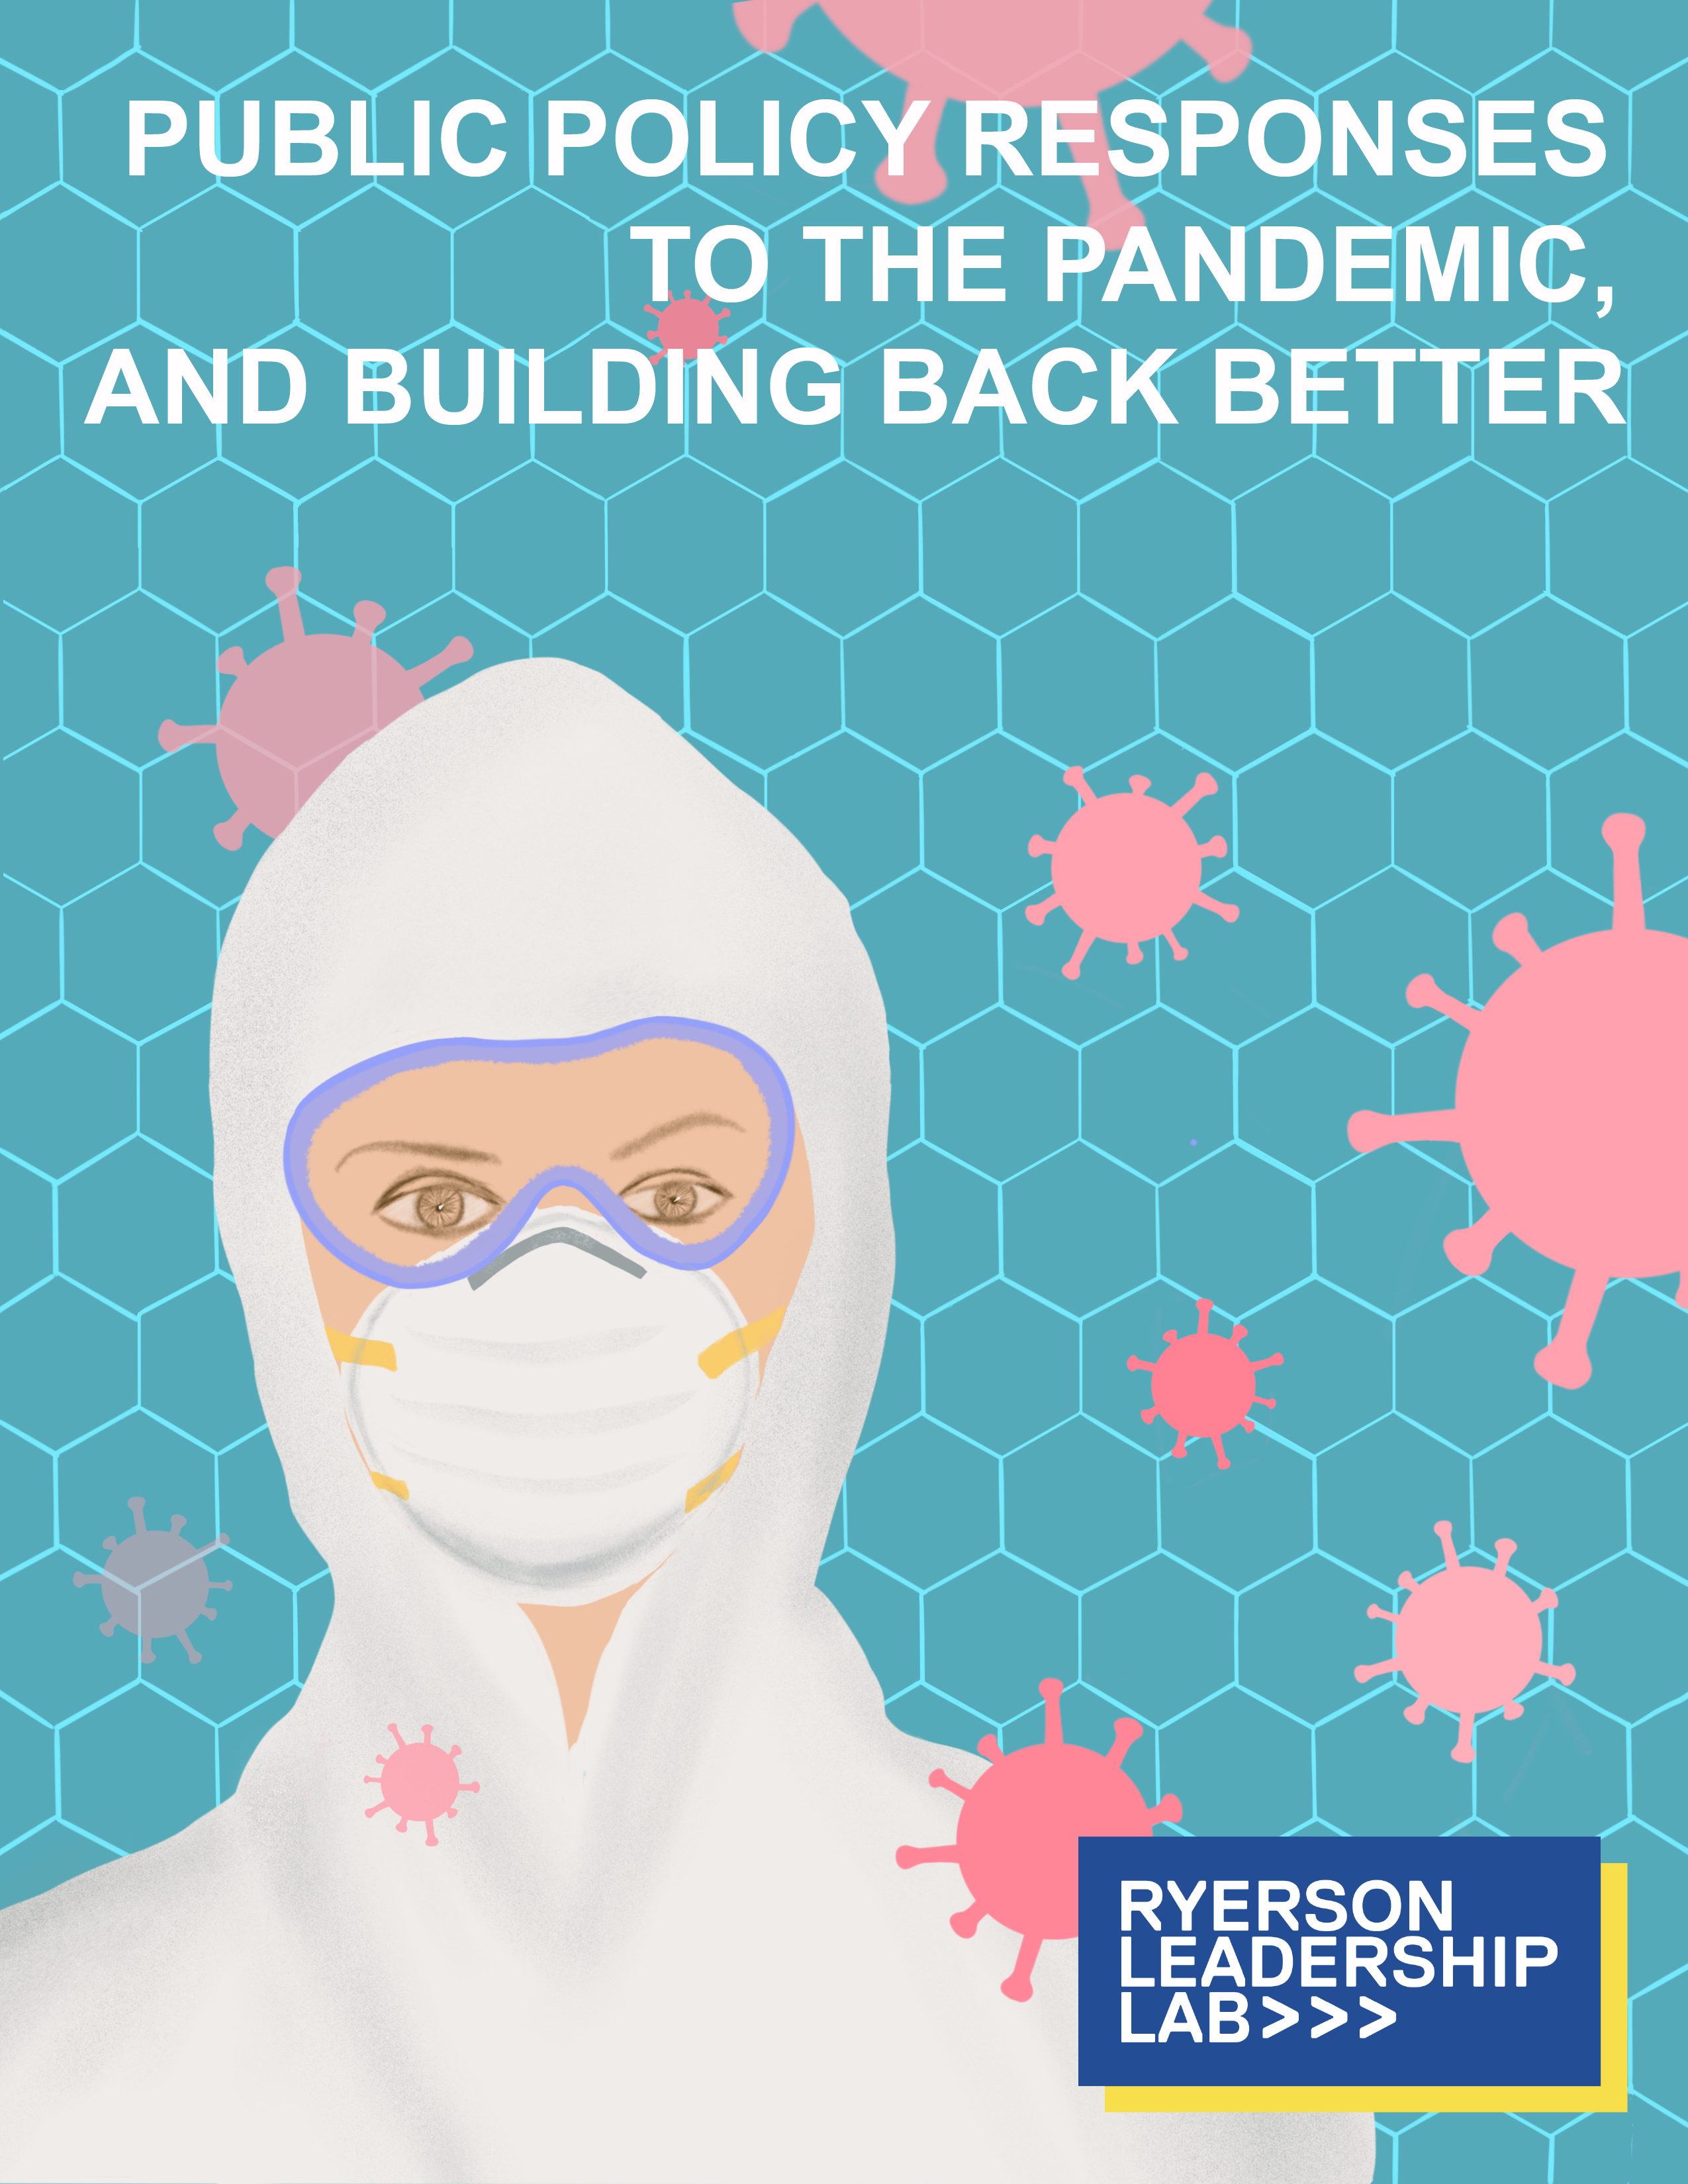 Cover illustration for the book titled &quot;Public Policy Responses to the Pandemic, and Building Back Better.&quot; Illustration includes a woman wearing a white mask and white hazardous materials suit with COVID particles surrounding her